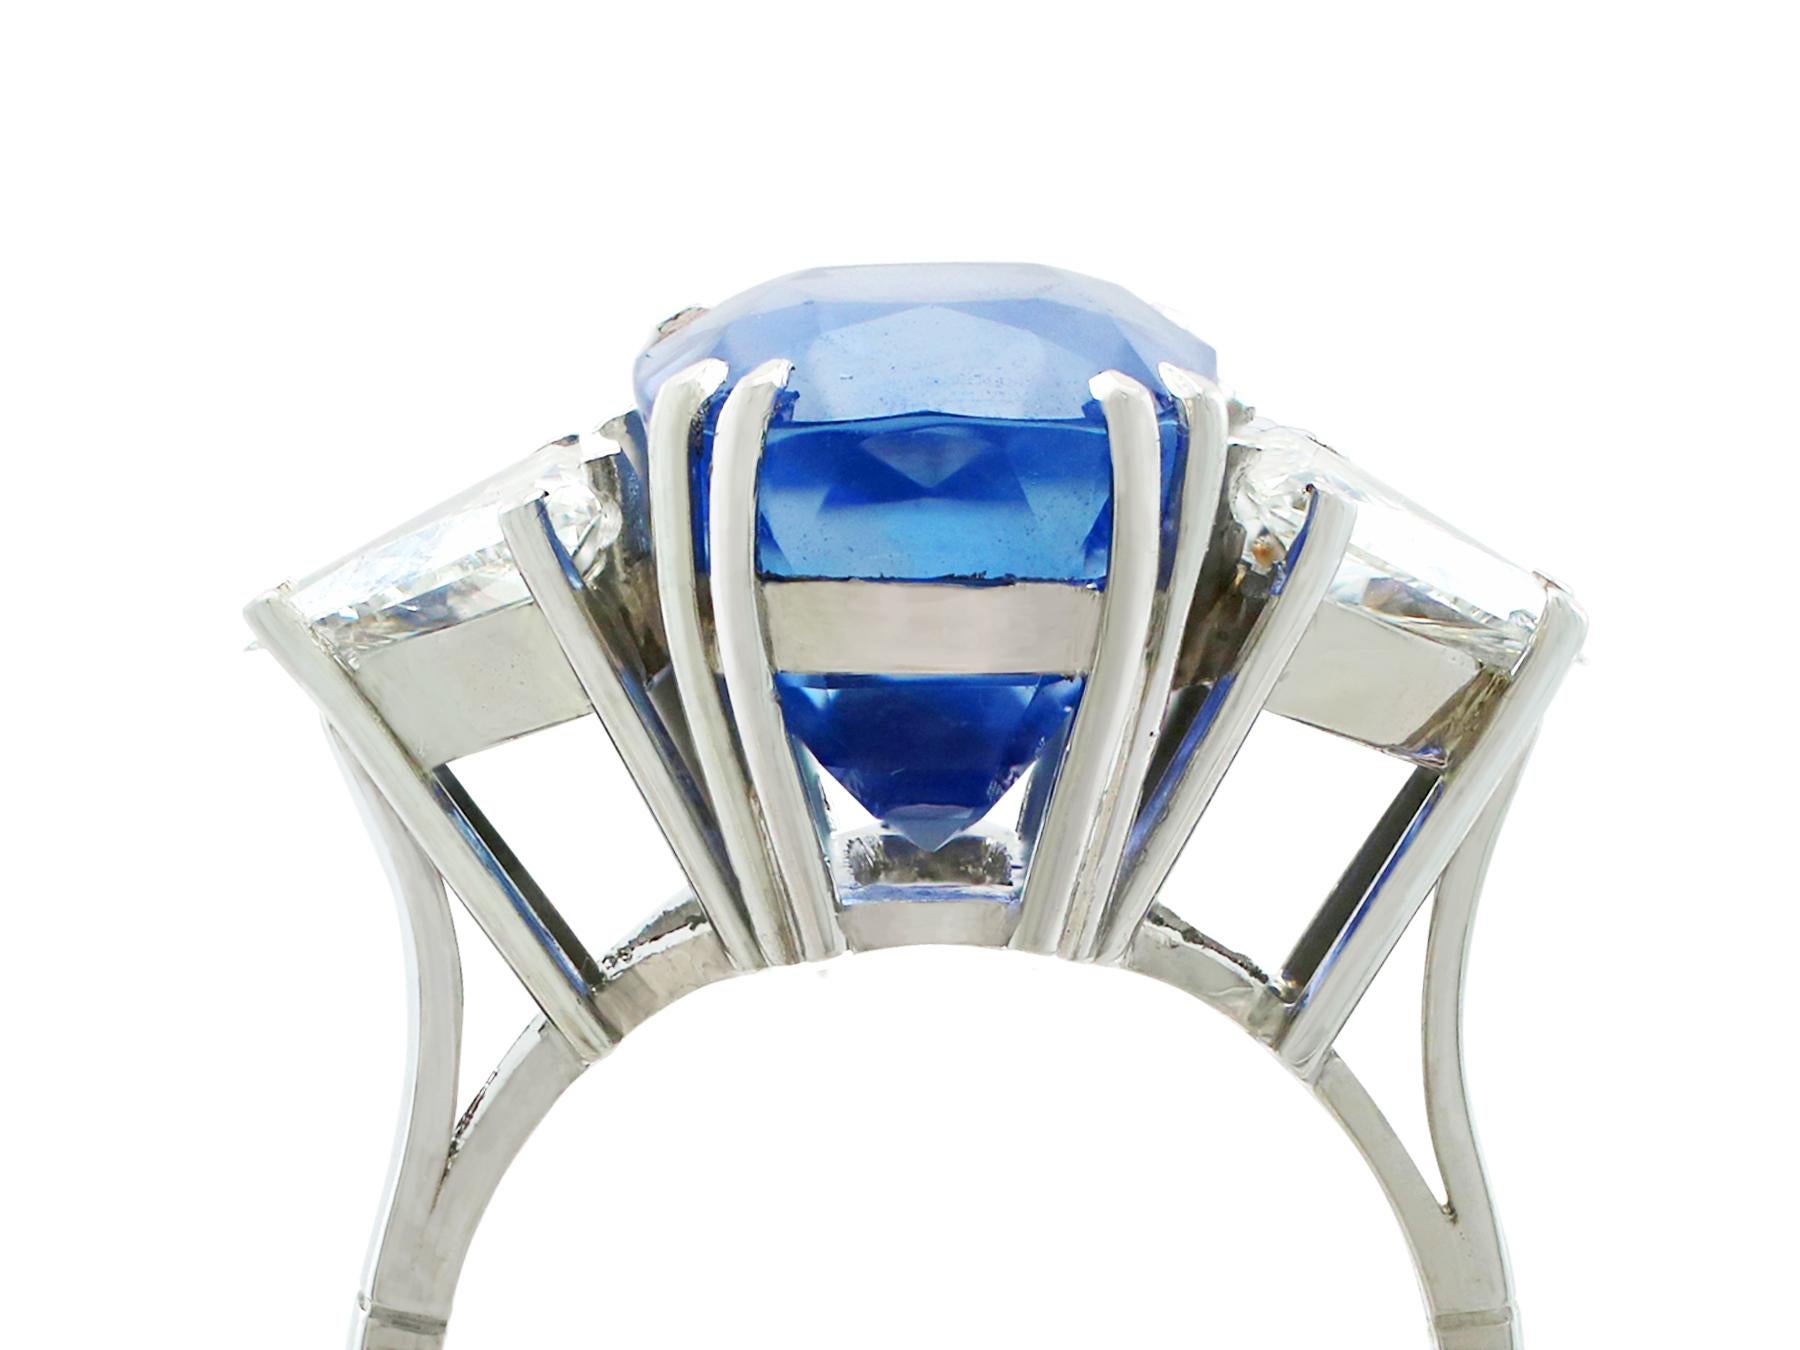 A stunning vintage 13.91 carat Ceylon sapphire and 1.70 carat diamond, 18 karat white gold trilogy style dress ring; part of our diverse vintage jewelry collections

This stunning, fine and impressive Ceylon sapphire and diamond ring has been